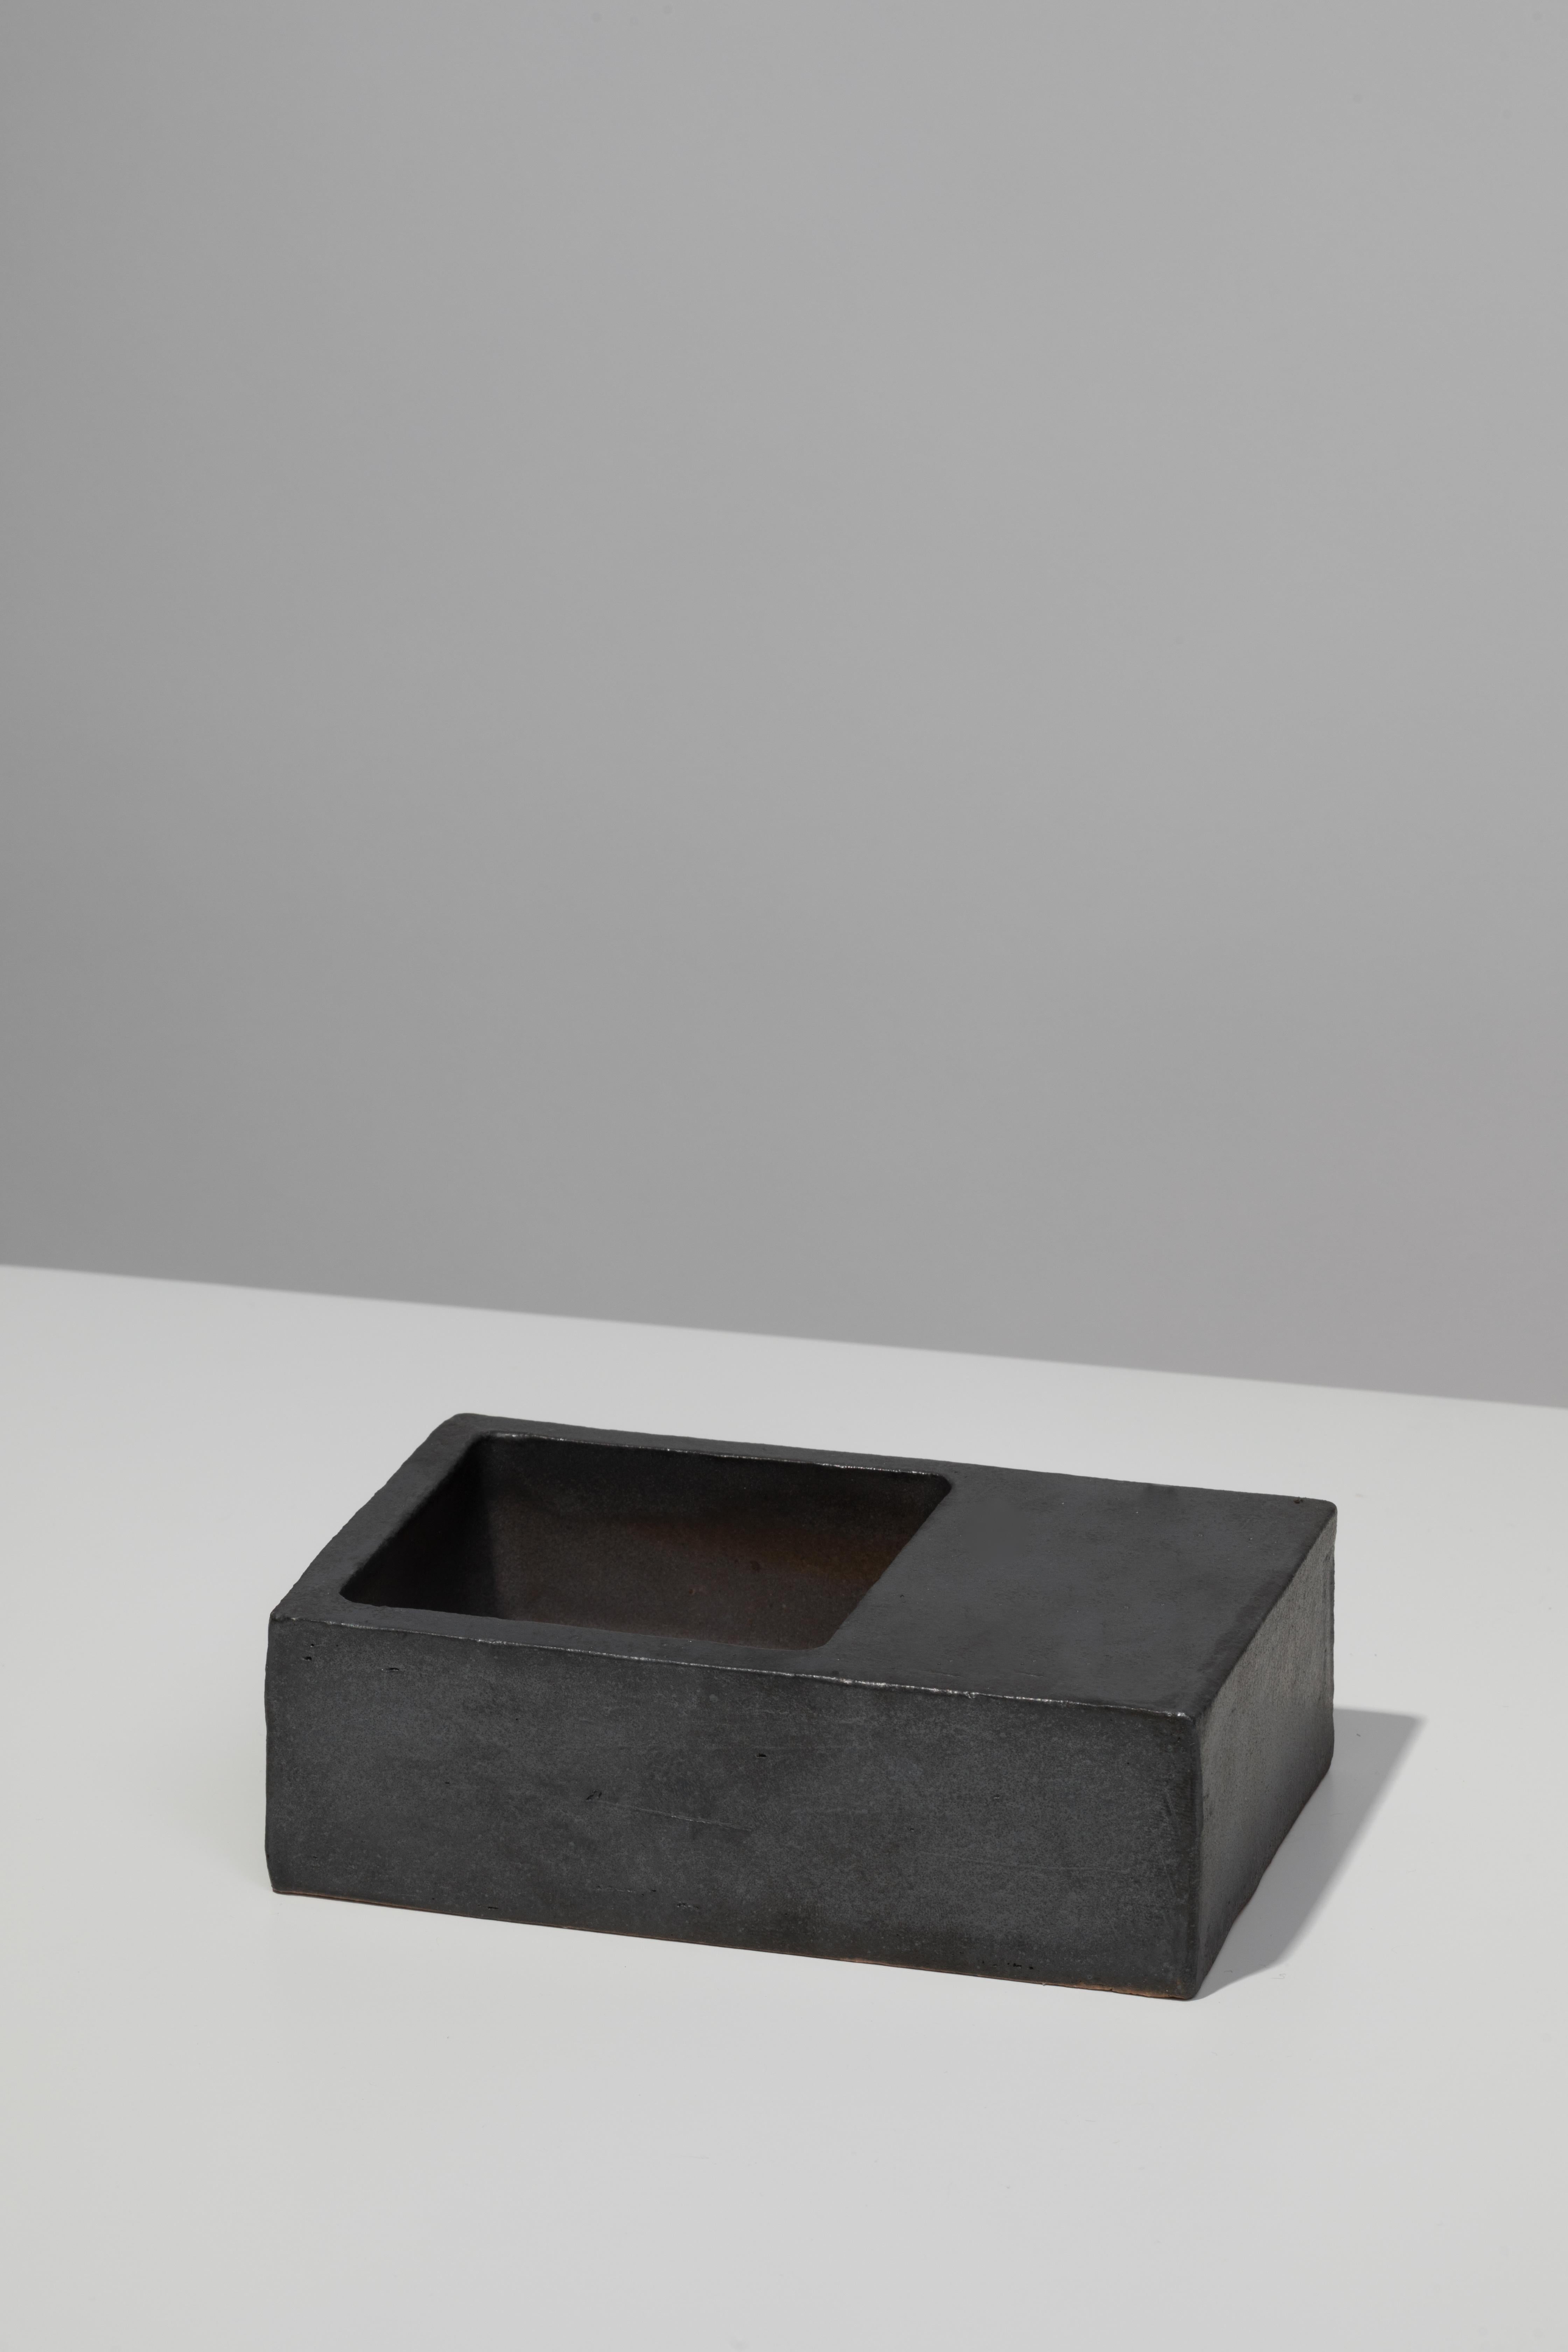 Slab-built ceramic vessel with black coppered glaze. Marked with an engraved bronze label to underside: Jonathan Nesci w/ Robert Pulley 18/01. 

Designed by Jonathan Nesci and made in Columbus, Indiana by local ceramist Robert Pulley for inaugural